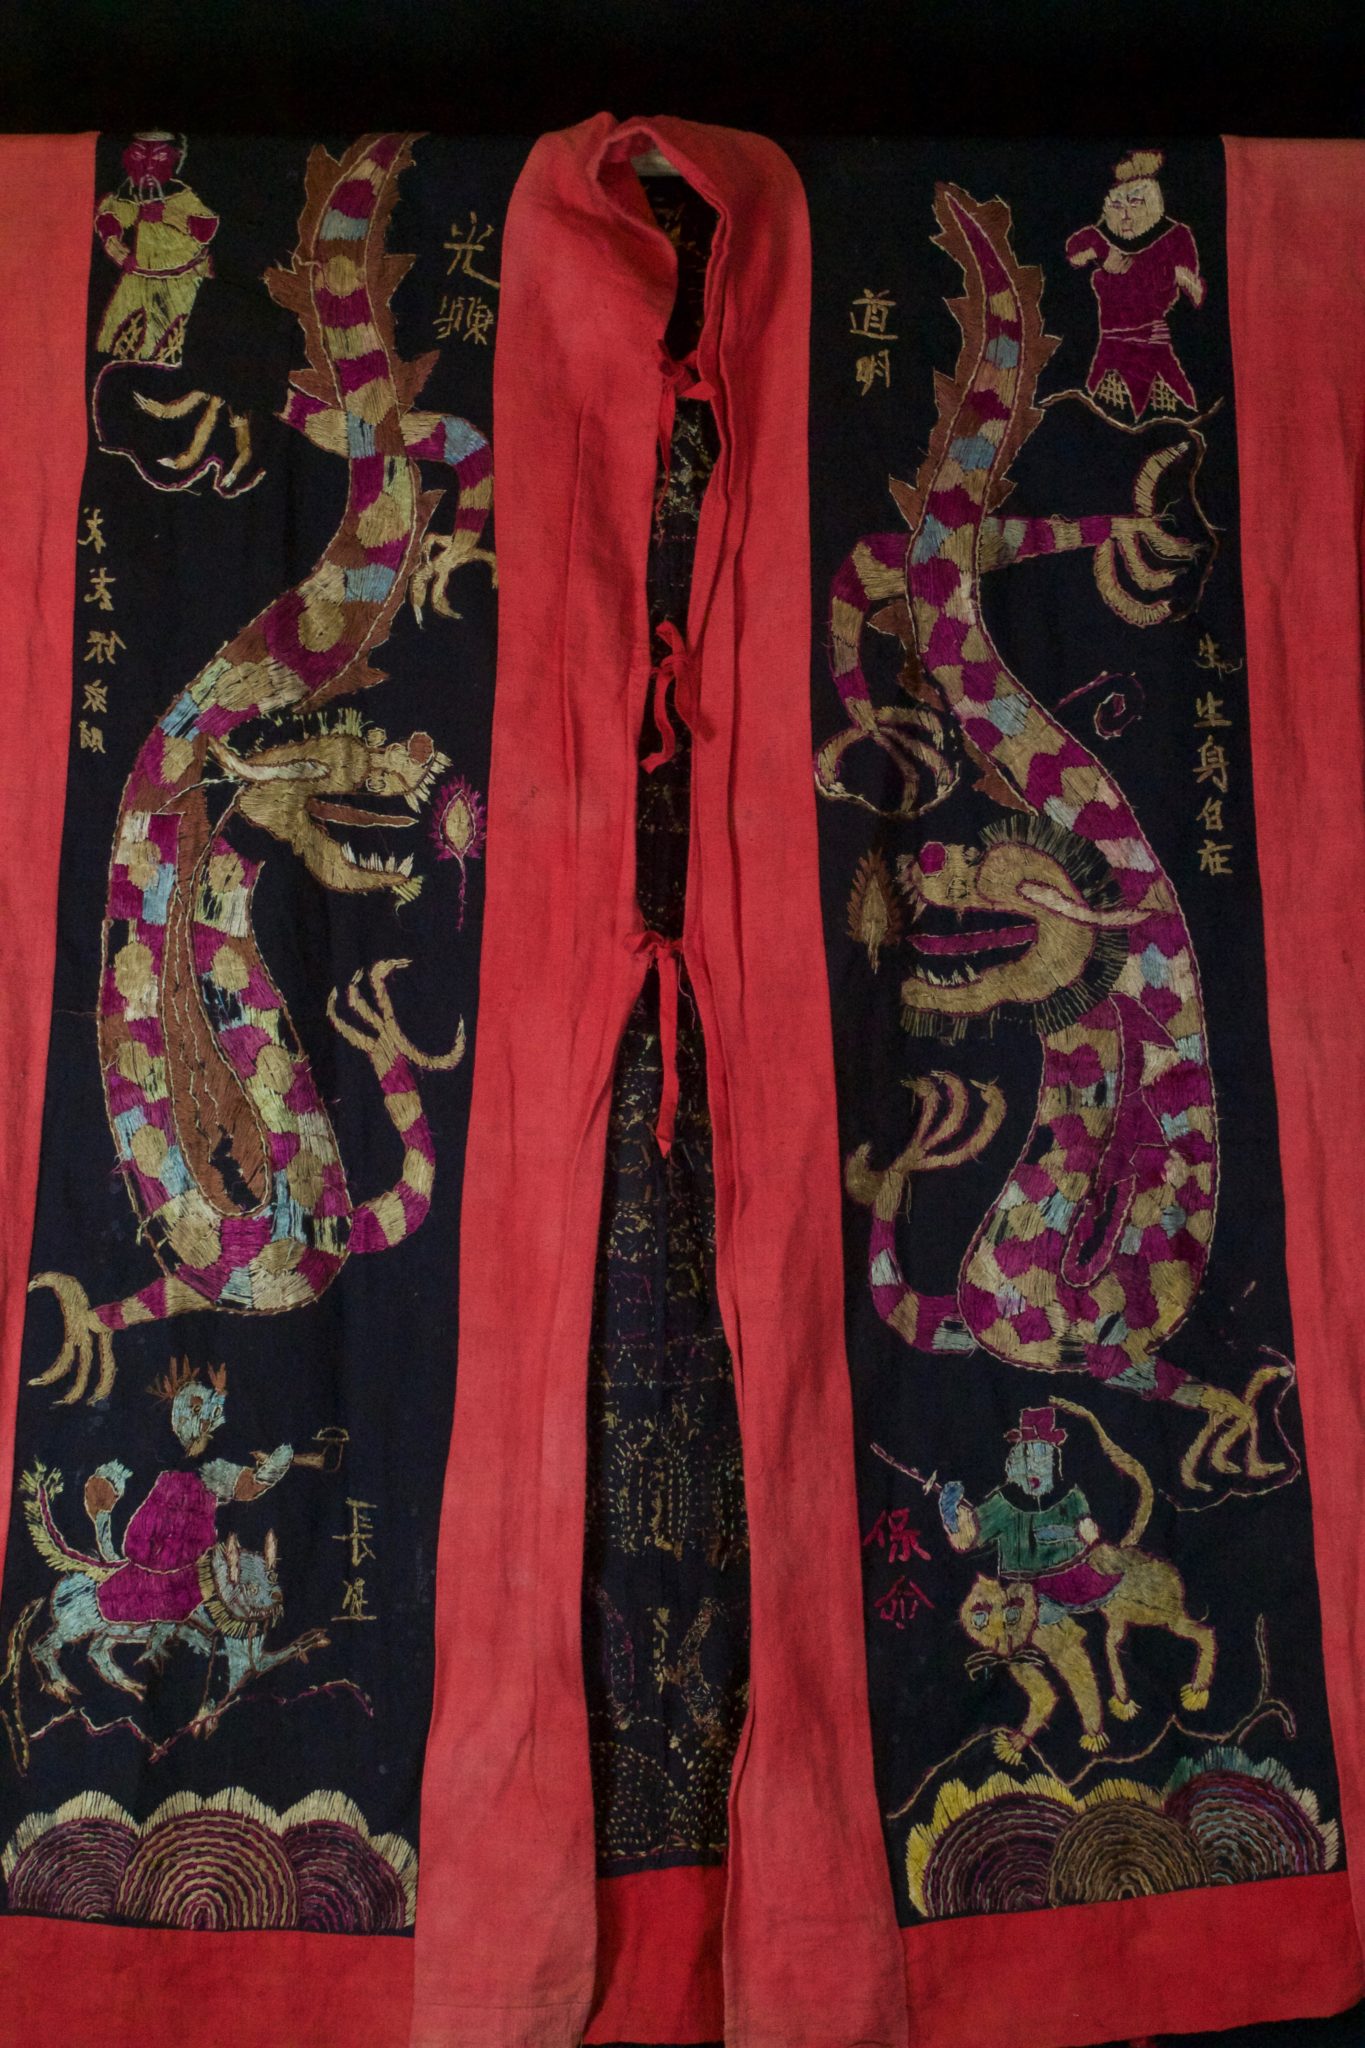 Dragon Robe/Ritual Cloak (front), Vietnam, Tao people, Early to mid 20th c, Cotton, silk embroidery. Worn only by high level priest/shaman for all ceremonies. The motif typically includes all the deities of heaven to clothe the shaman in the universe for protection. Not a vain adornment, it is a reminder of man's place in the hierarchical order. Originally a female costume. Long ago shamans were women and men the providers. Not being encumbered by childbirth and rearing, men replaces women as shamans but retained this part of the sacred costume. 48” x 39”, $2700.